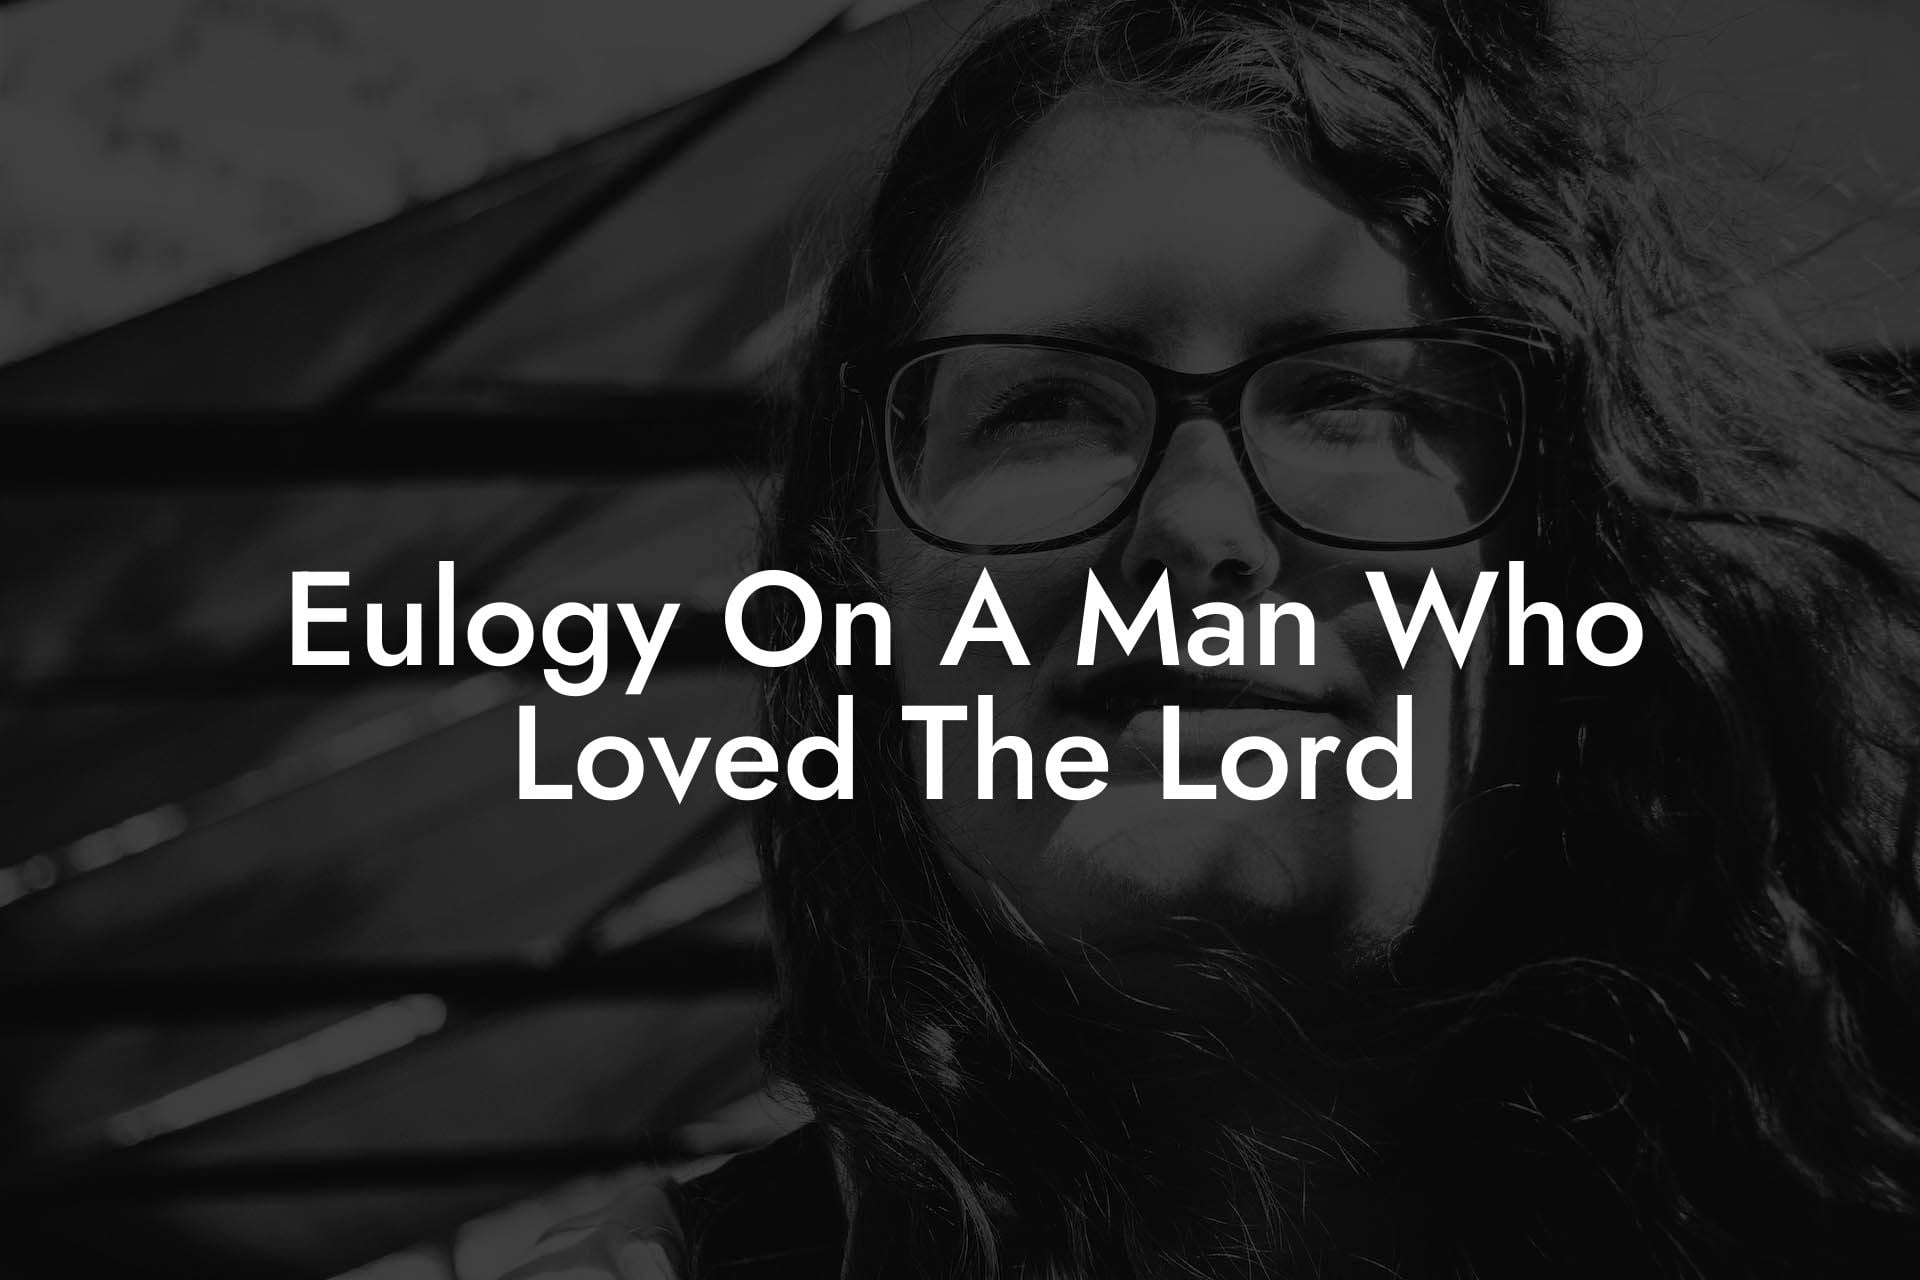 Eulogy On A Man Who Loved The Lord